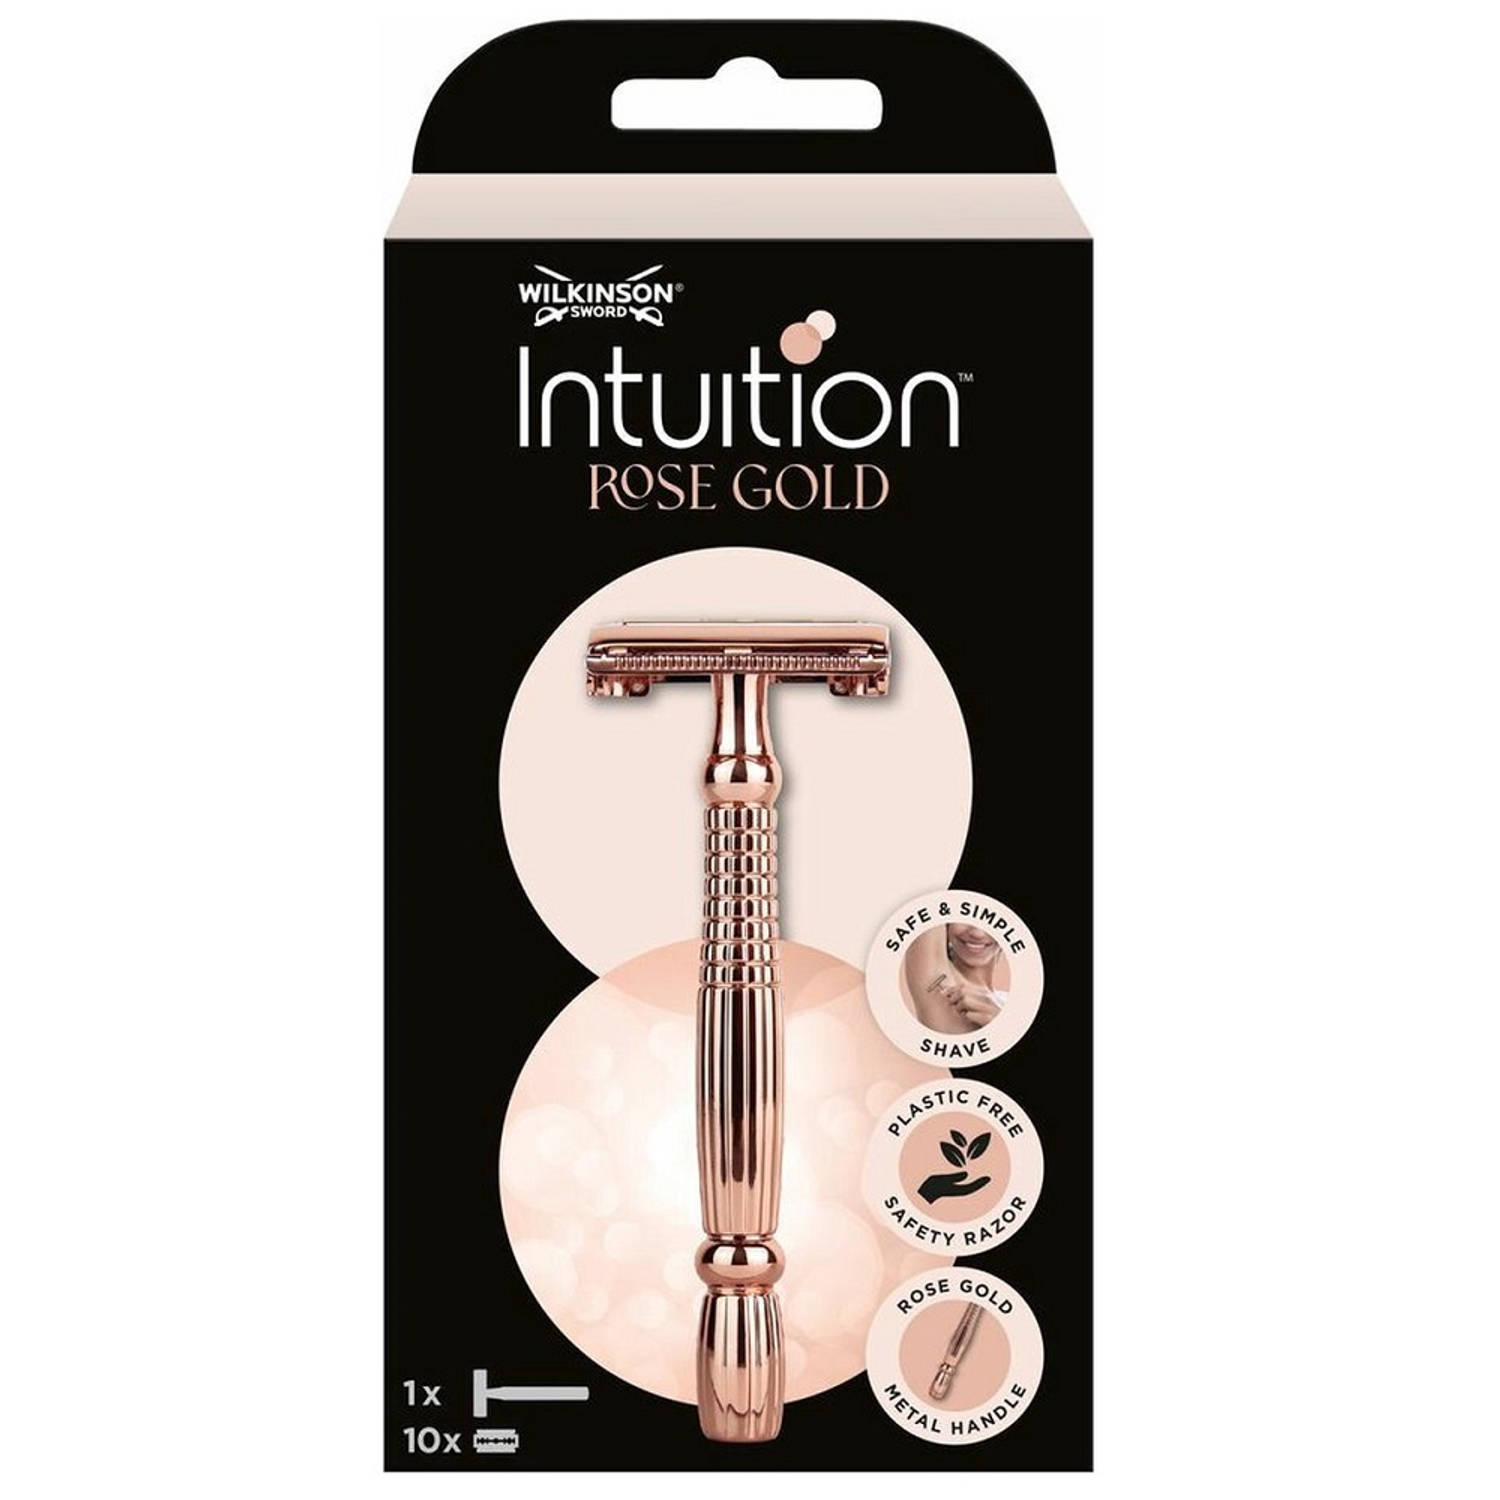 Wilkinson Woman Intuition Safety Razor Rose Gold 1 + 10